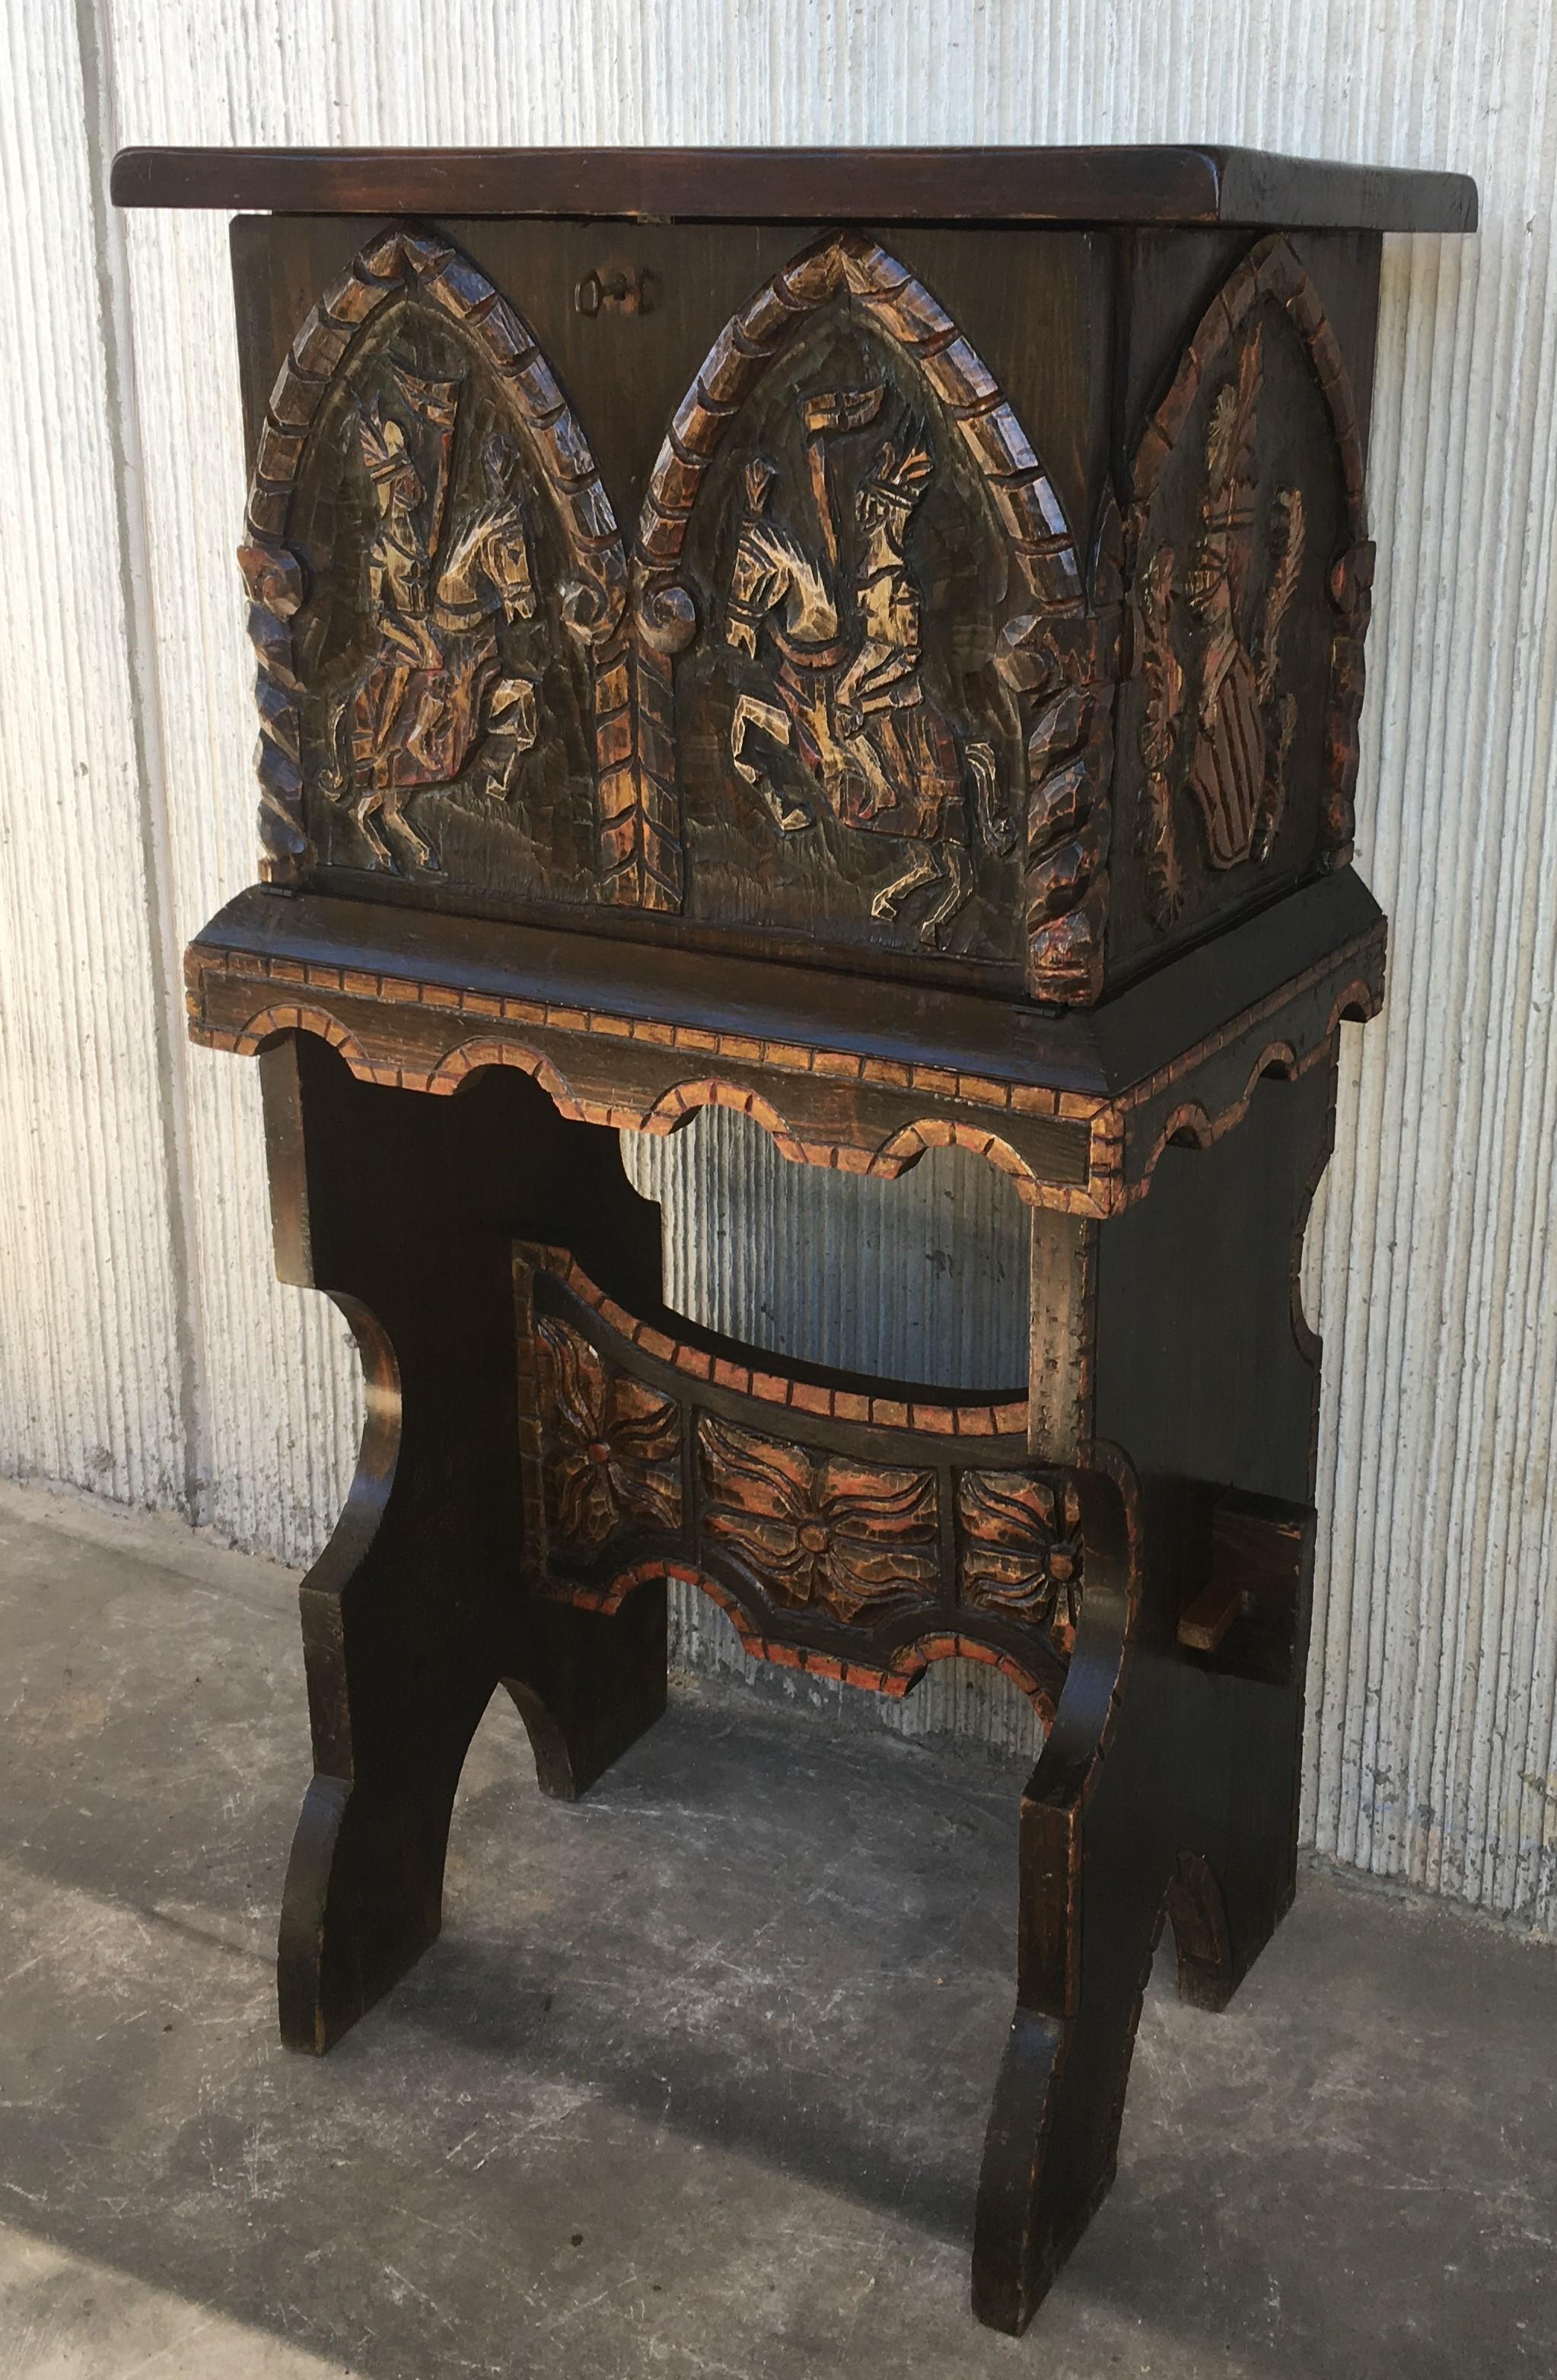 20th century cabinet bar on stand, Varqueno, Bargueño, buffet, Spain

Impressive carved and polichromed cabinet bar on stand. 
Beautiful reliefs with heraldics motifs and horse rider cavalry depicting.
It proceeds of a Monte Picayo Casino in